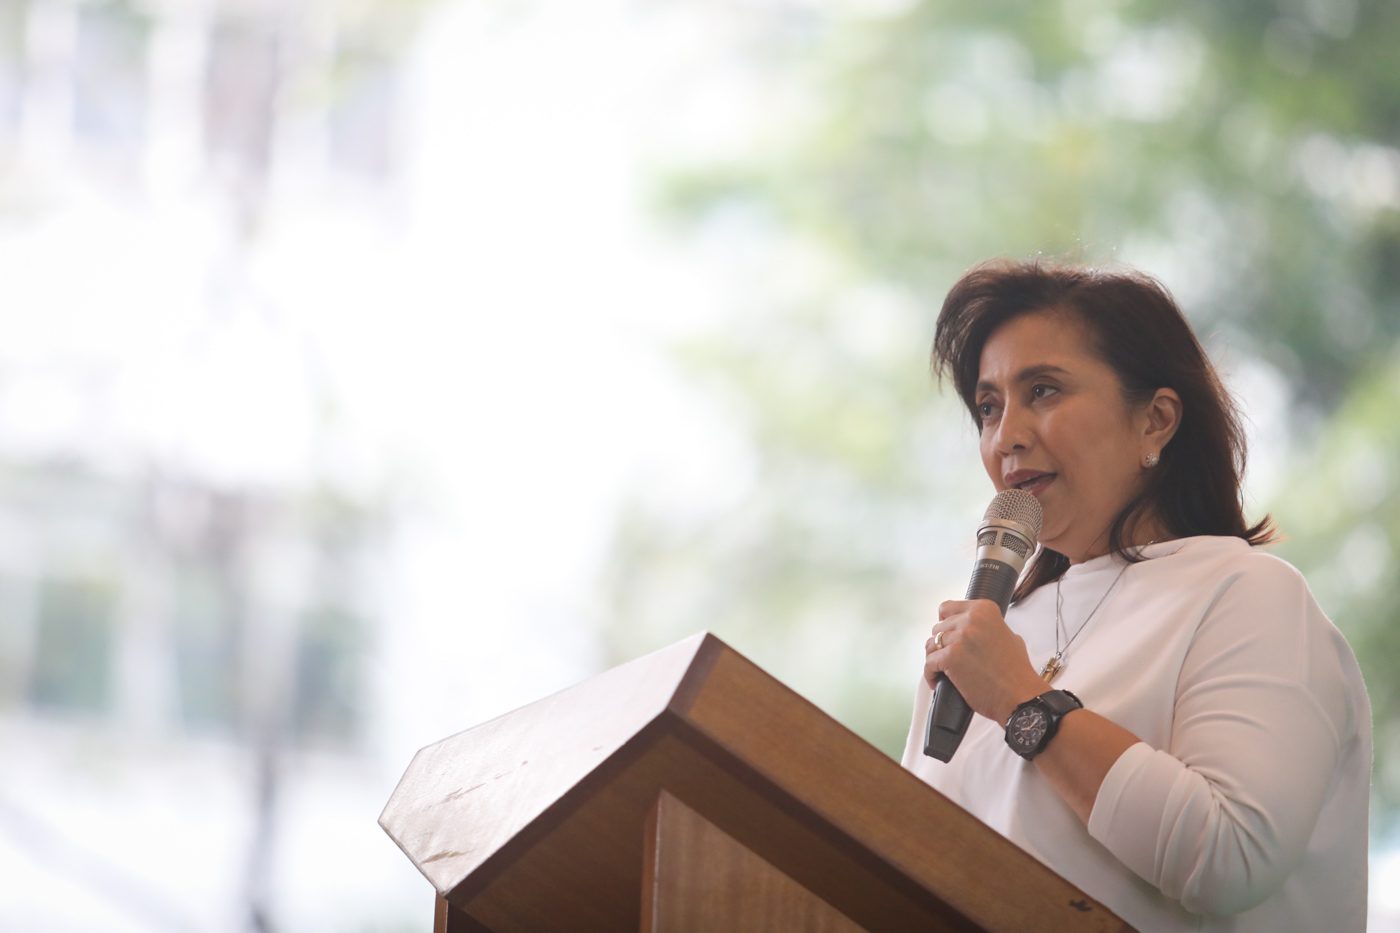 Malacañang clears Robredo in supposed Duterte ouster plot